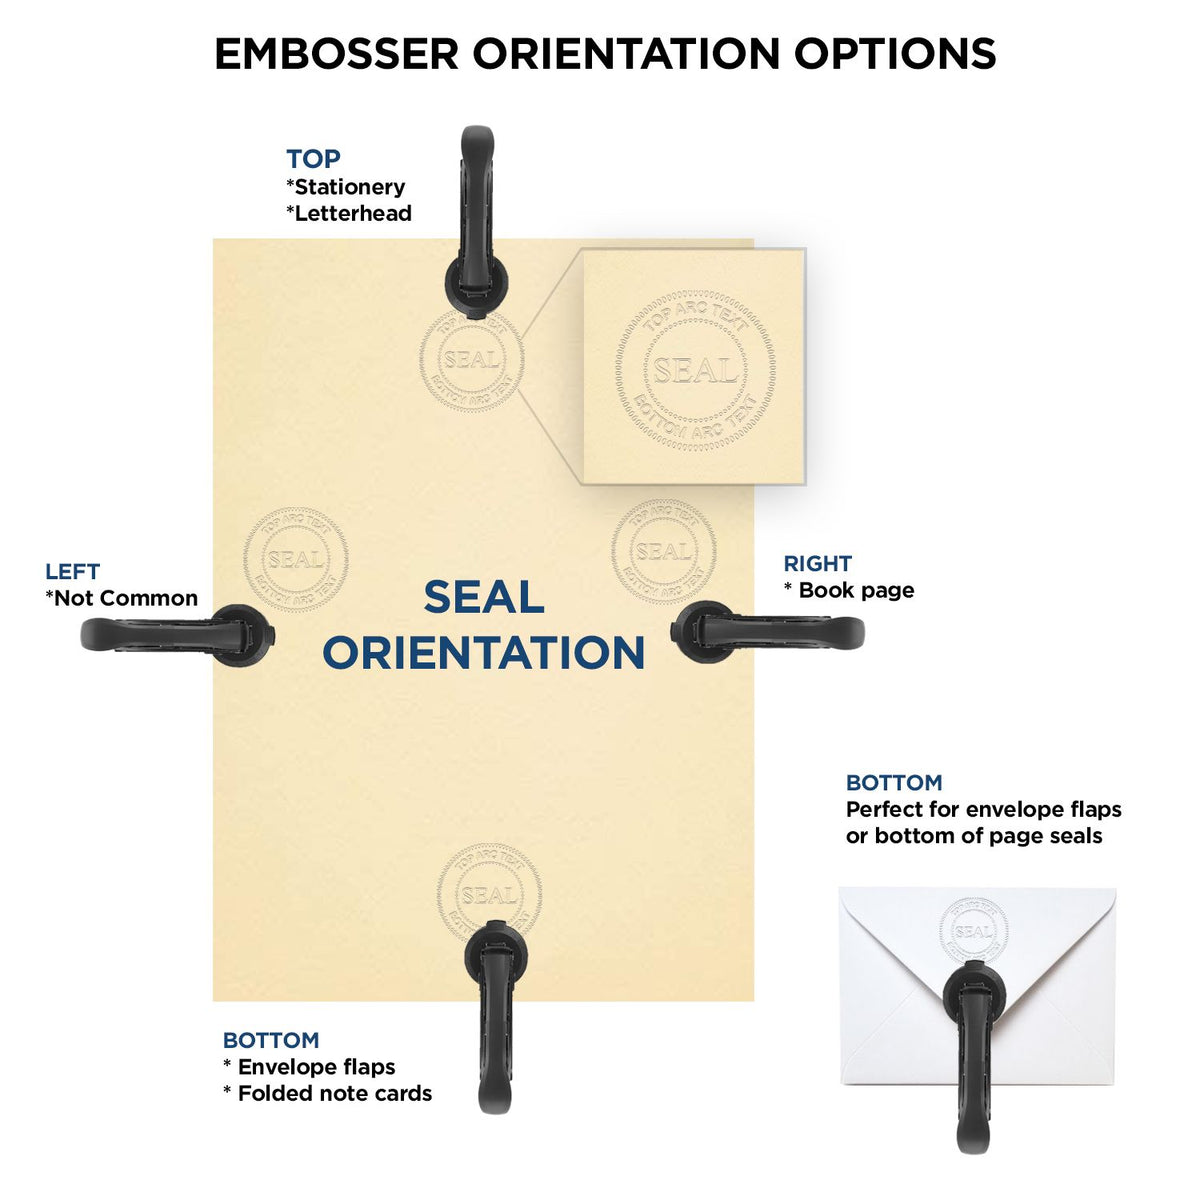 An infographic for the State of Arizona Extended Long Reach Engineer Seal showing embosser orientation, this is showing examples of a top, bottom, right and left insert.